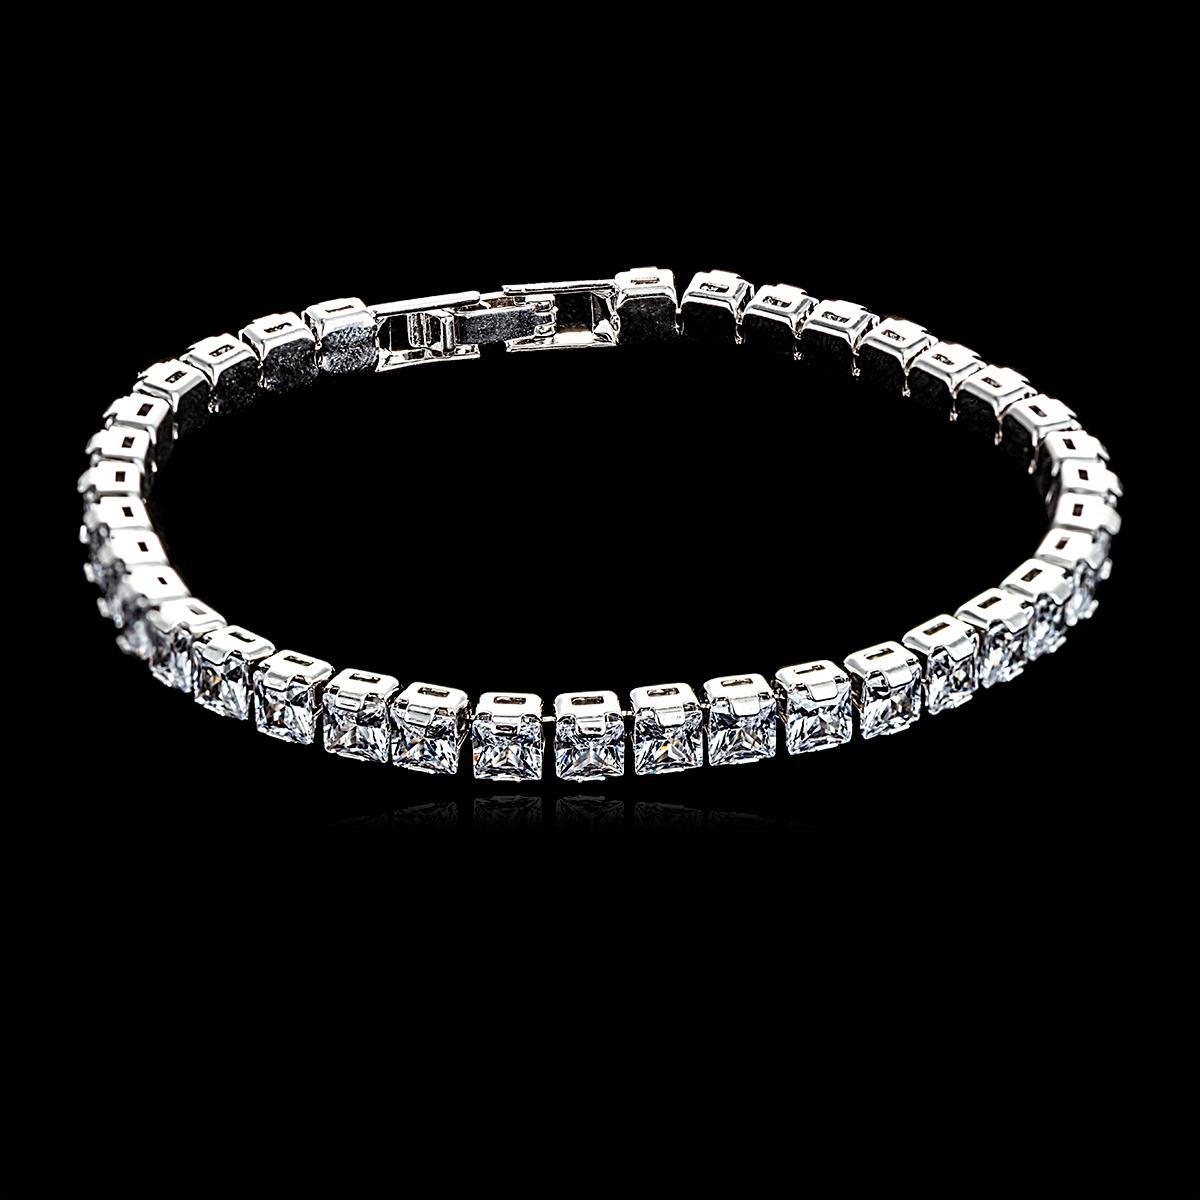 Low Cost Platinum Plated Casual Tennis Bracelet with Full Guarantee